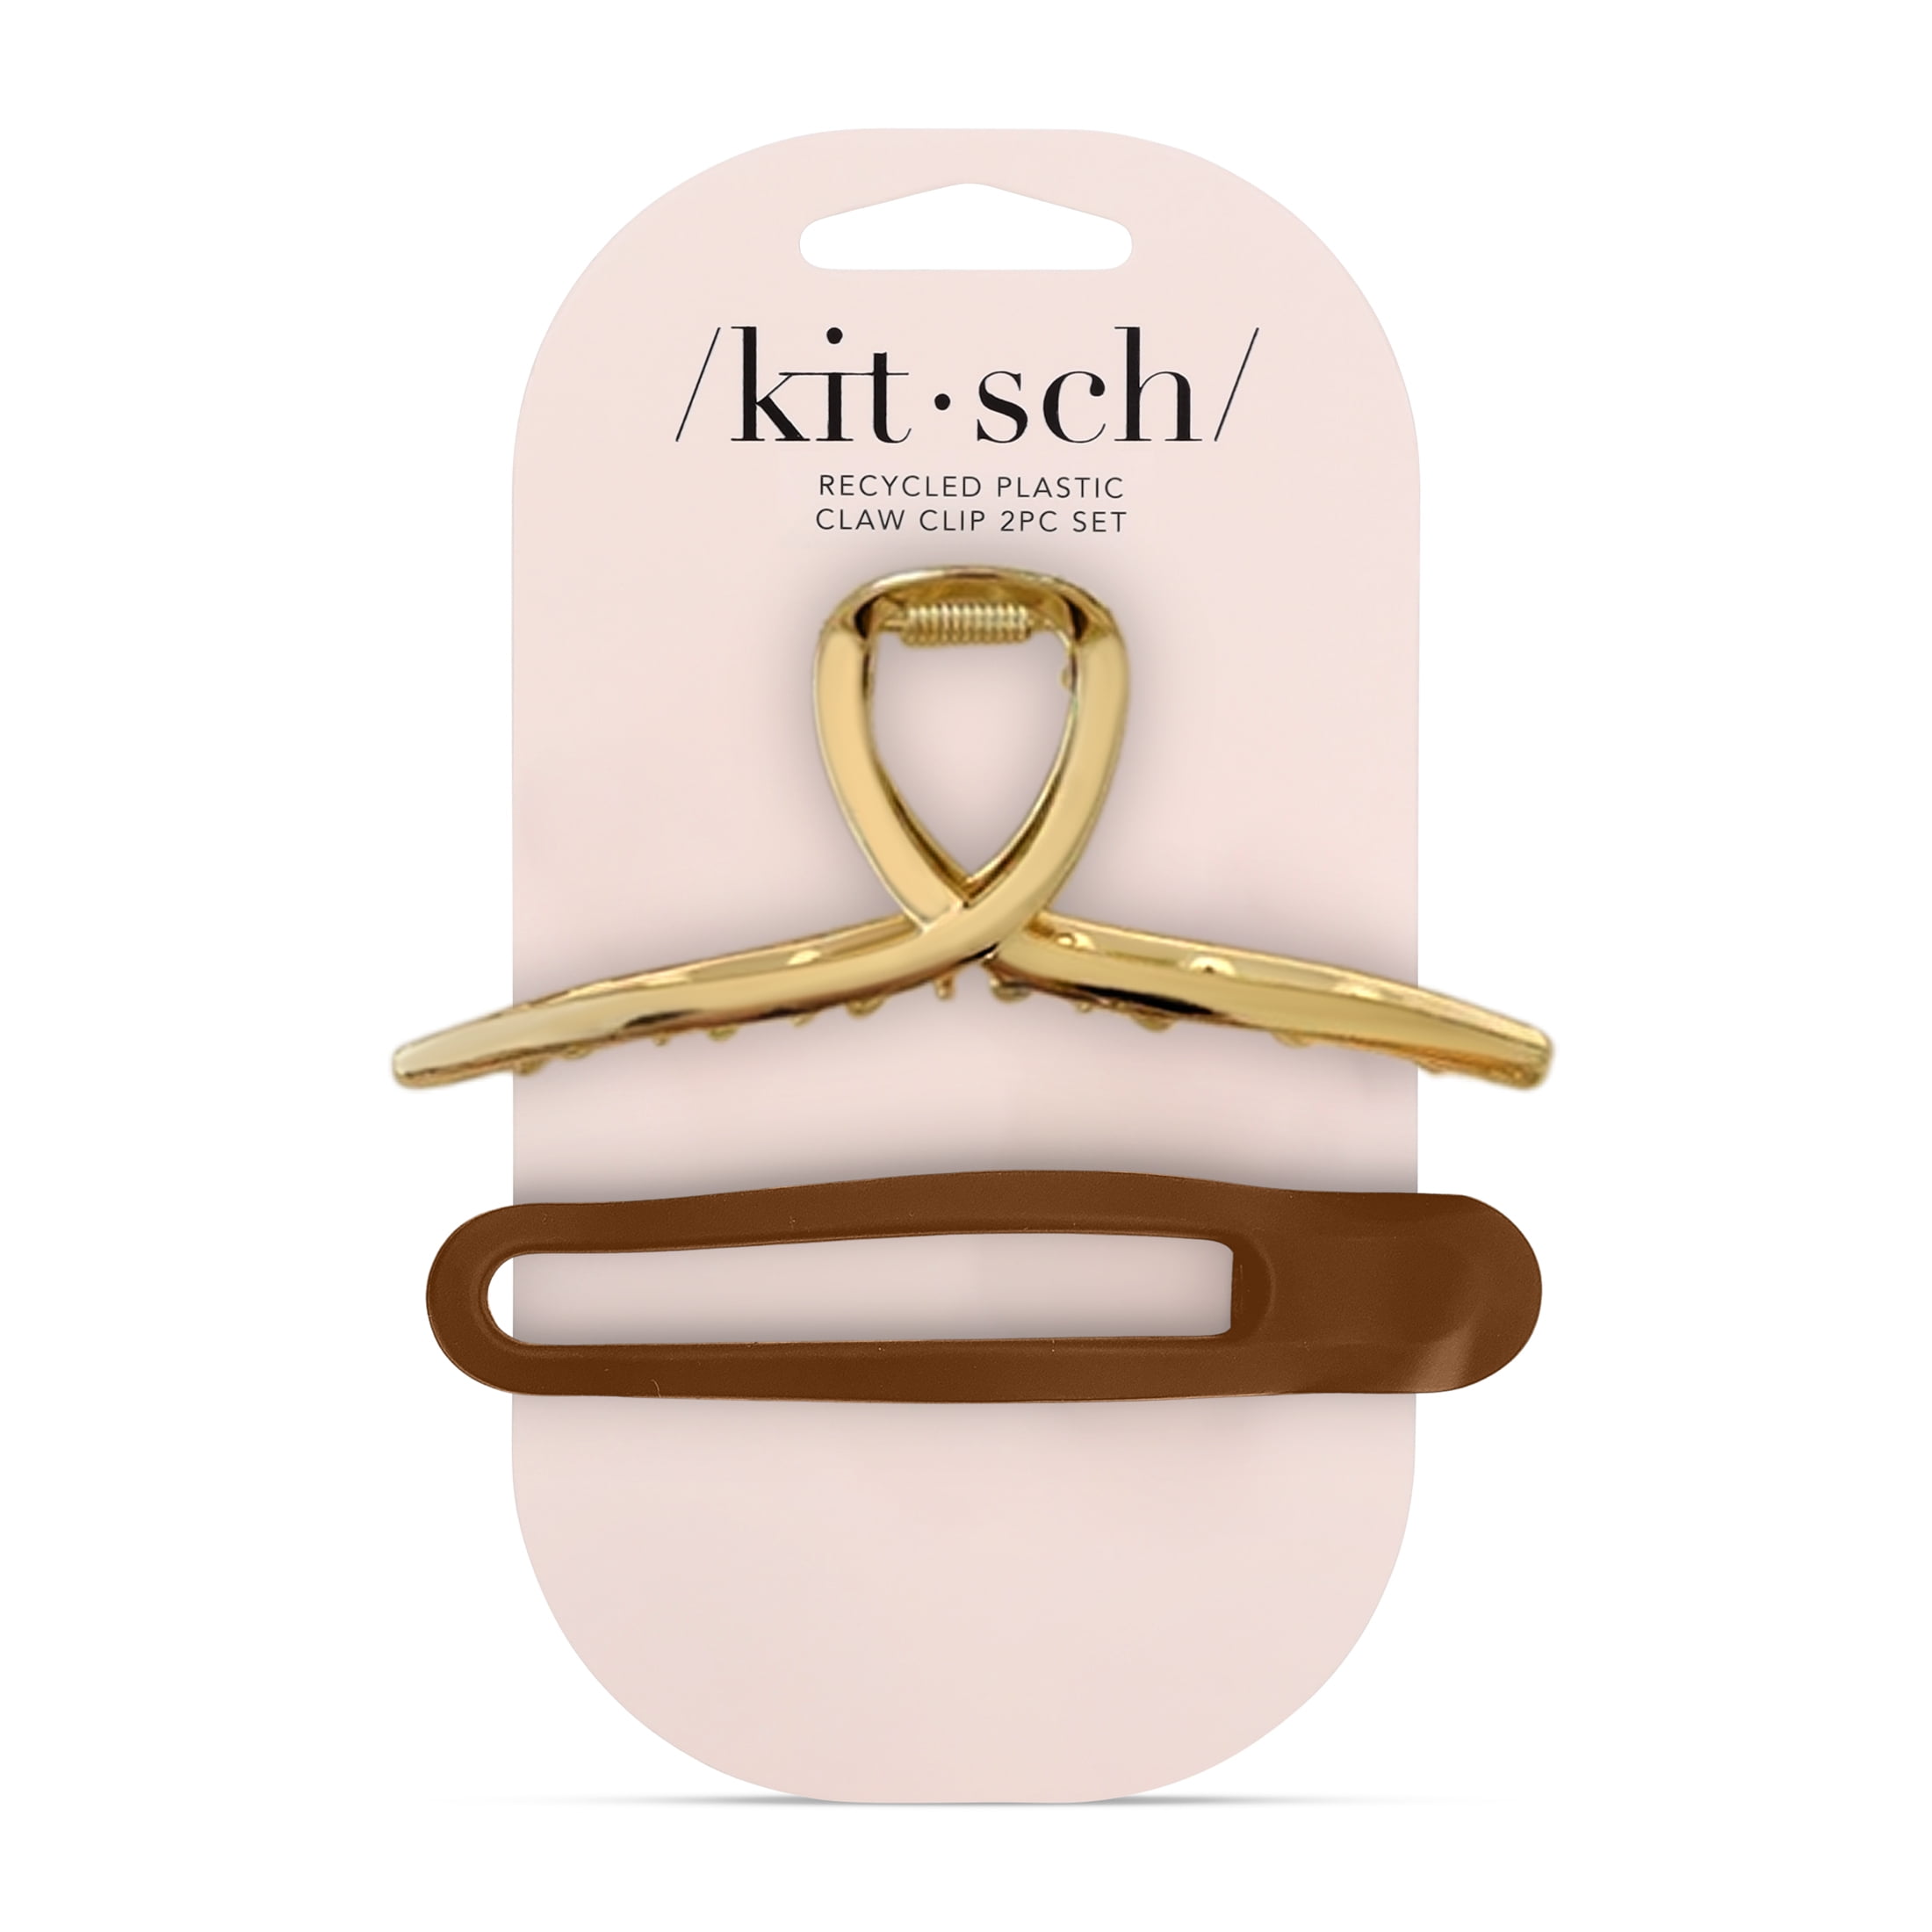 Kitsch Claw Clip Set 2pcs with Metal Loop & Flat Lay Curved Claw, Gold / Brown, Size: One Size